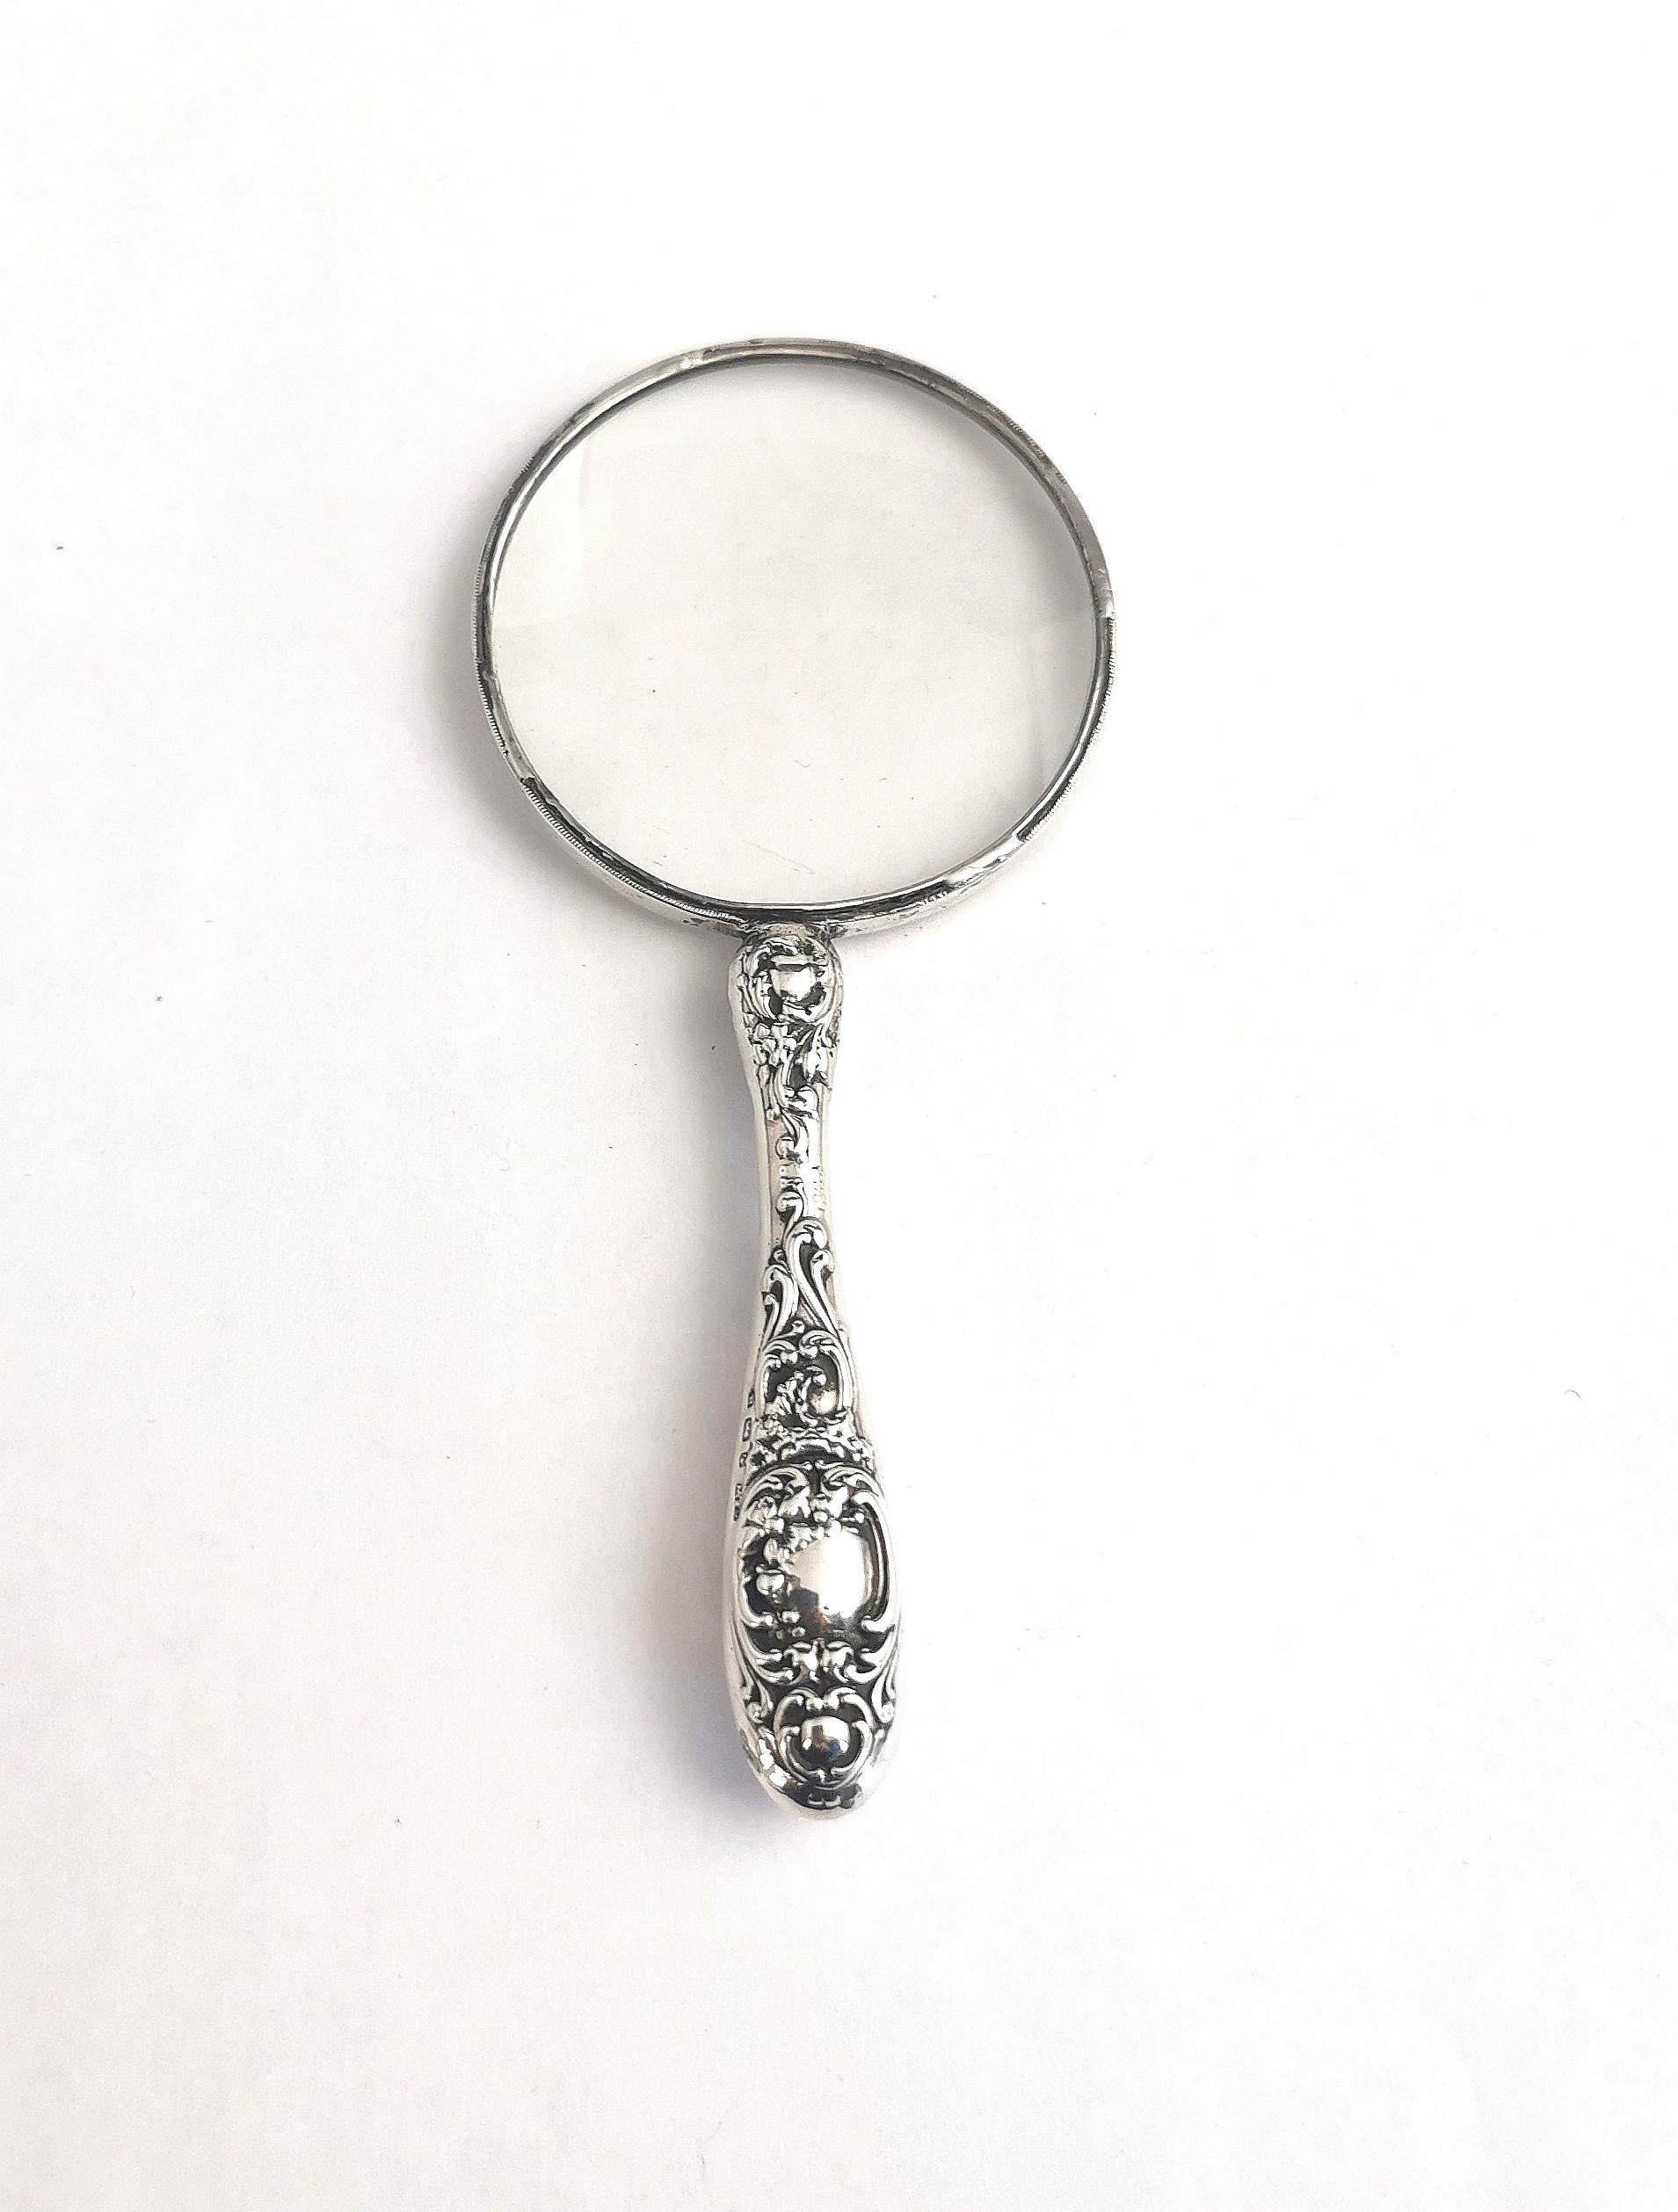 Antique Victorian Sterling Silver Magnifying Glass, Repousse 5